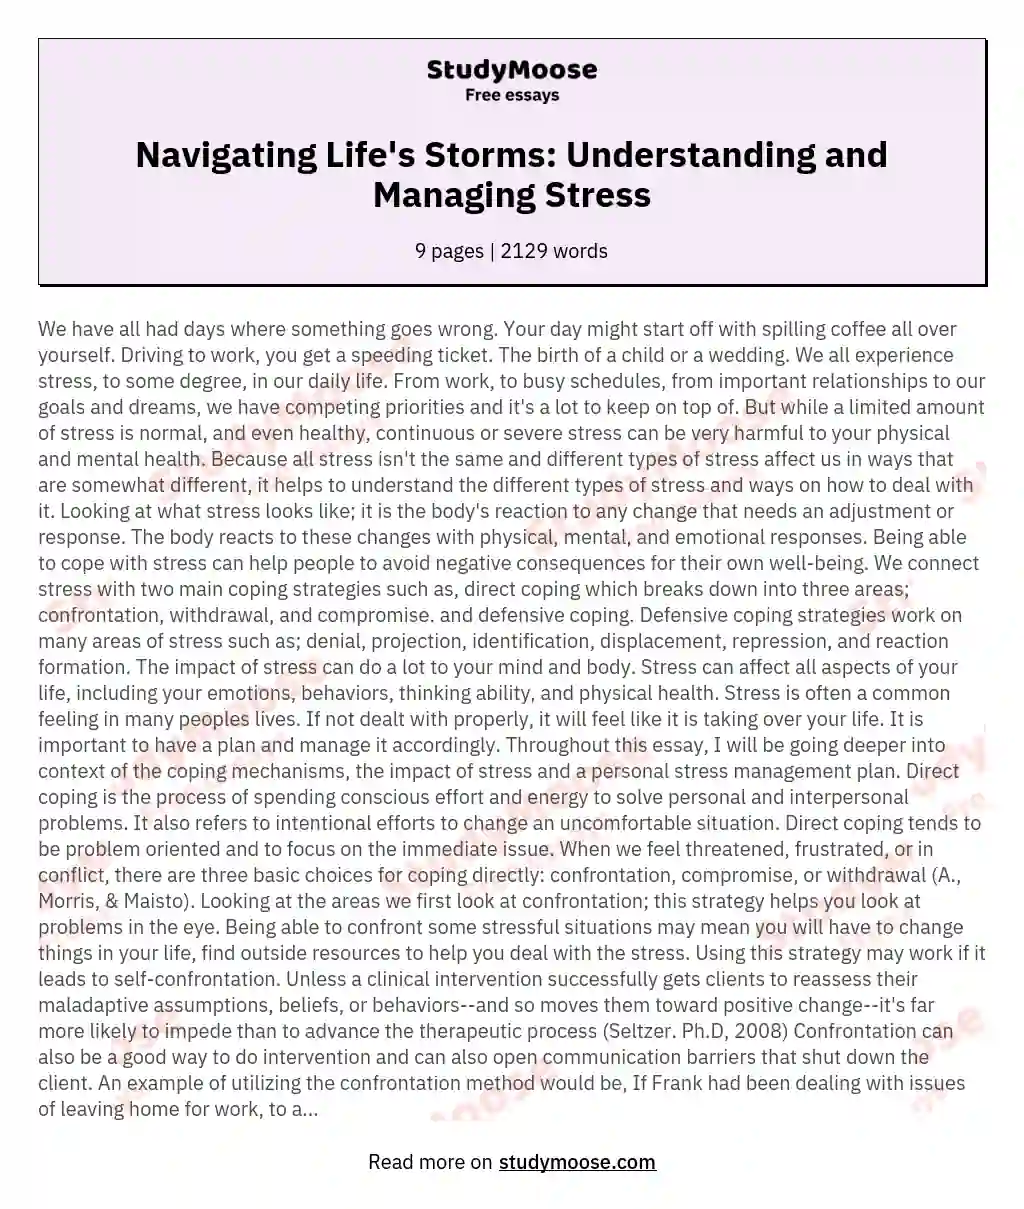 Navigating Life's Storms: Understanding and Managing Stress essay